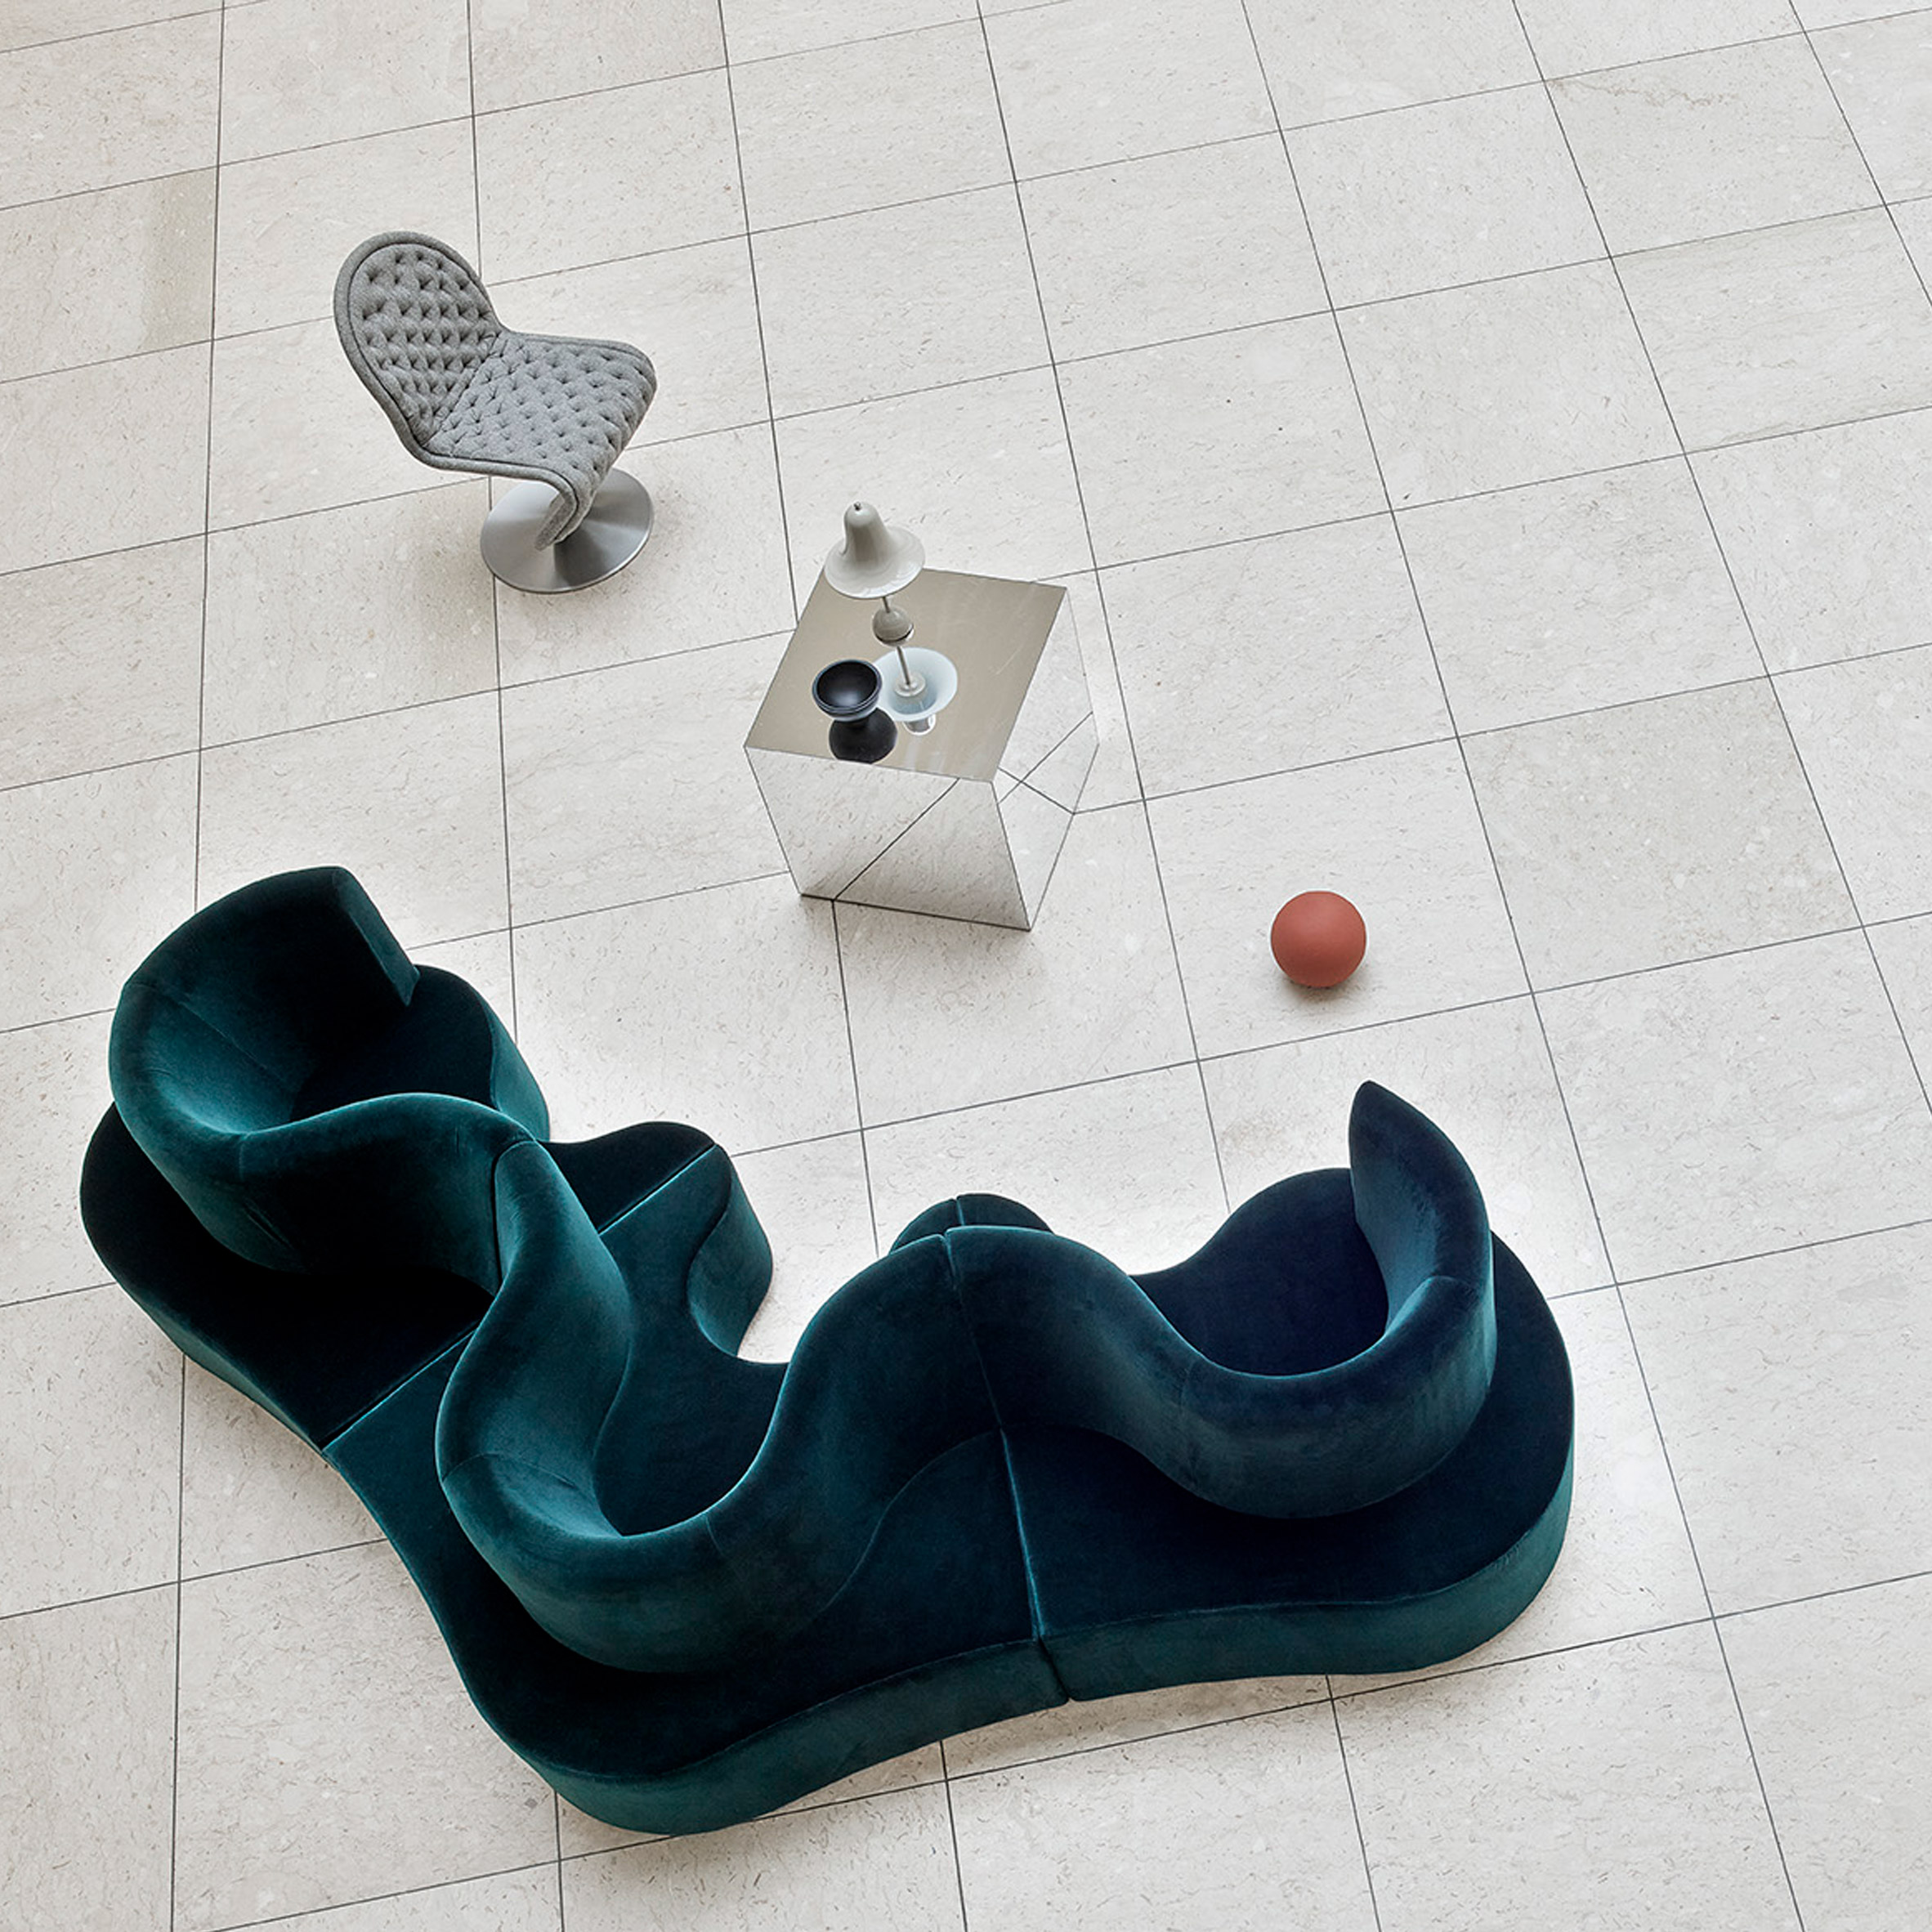 A photograph taken from above of a green velvet Cloverleaf sofa on a white tiled floor, showing its curved form